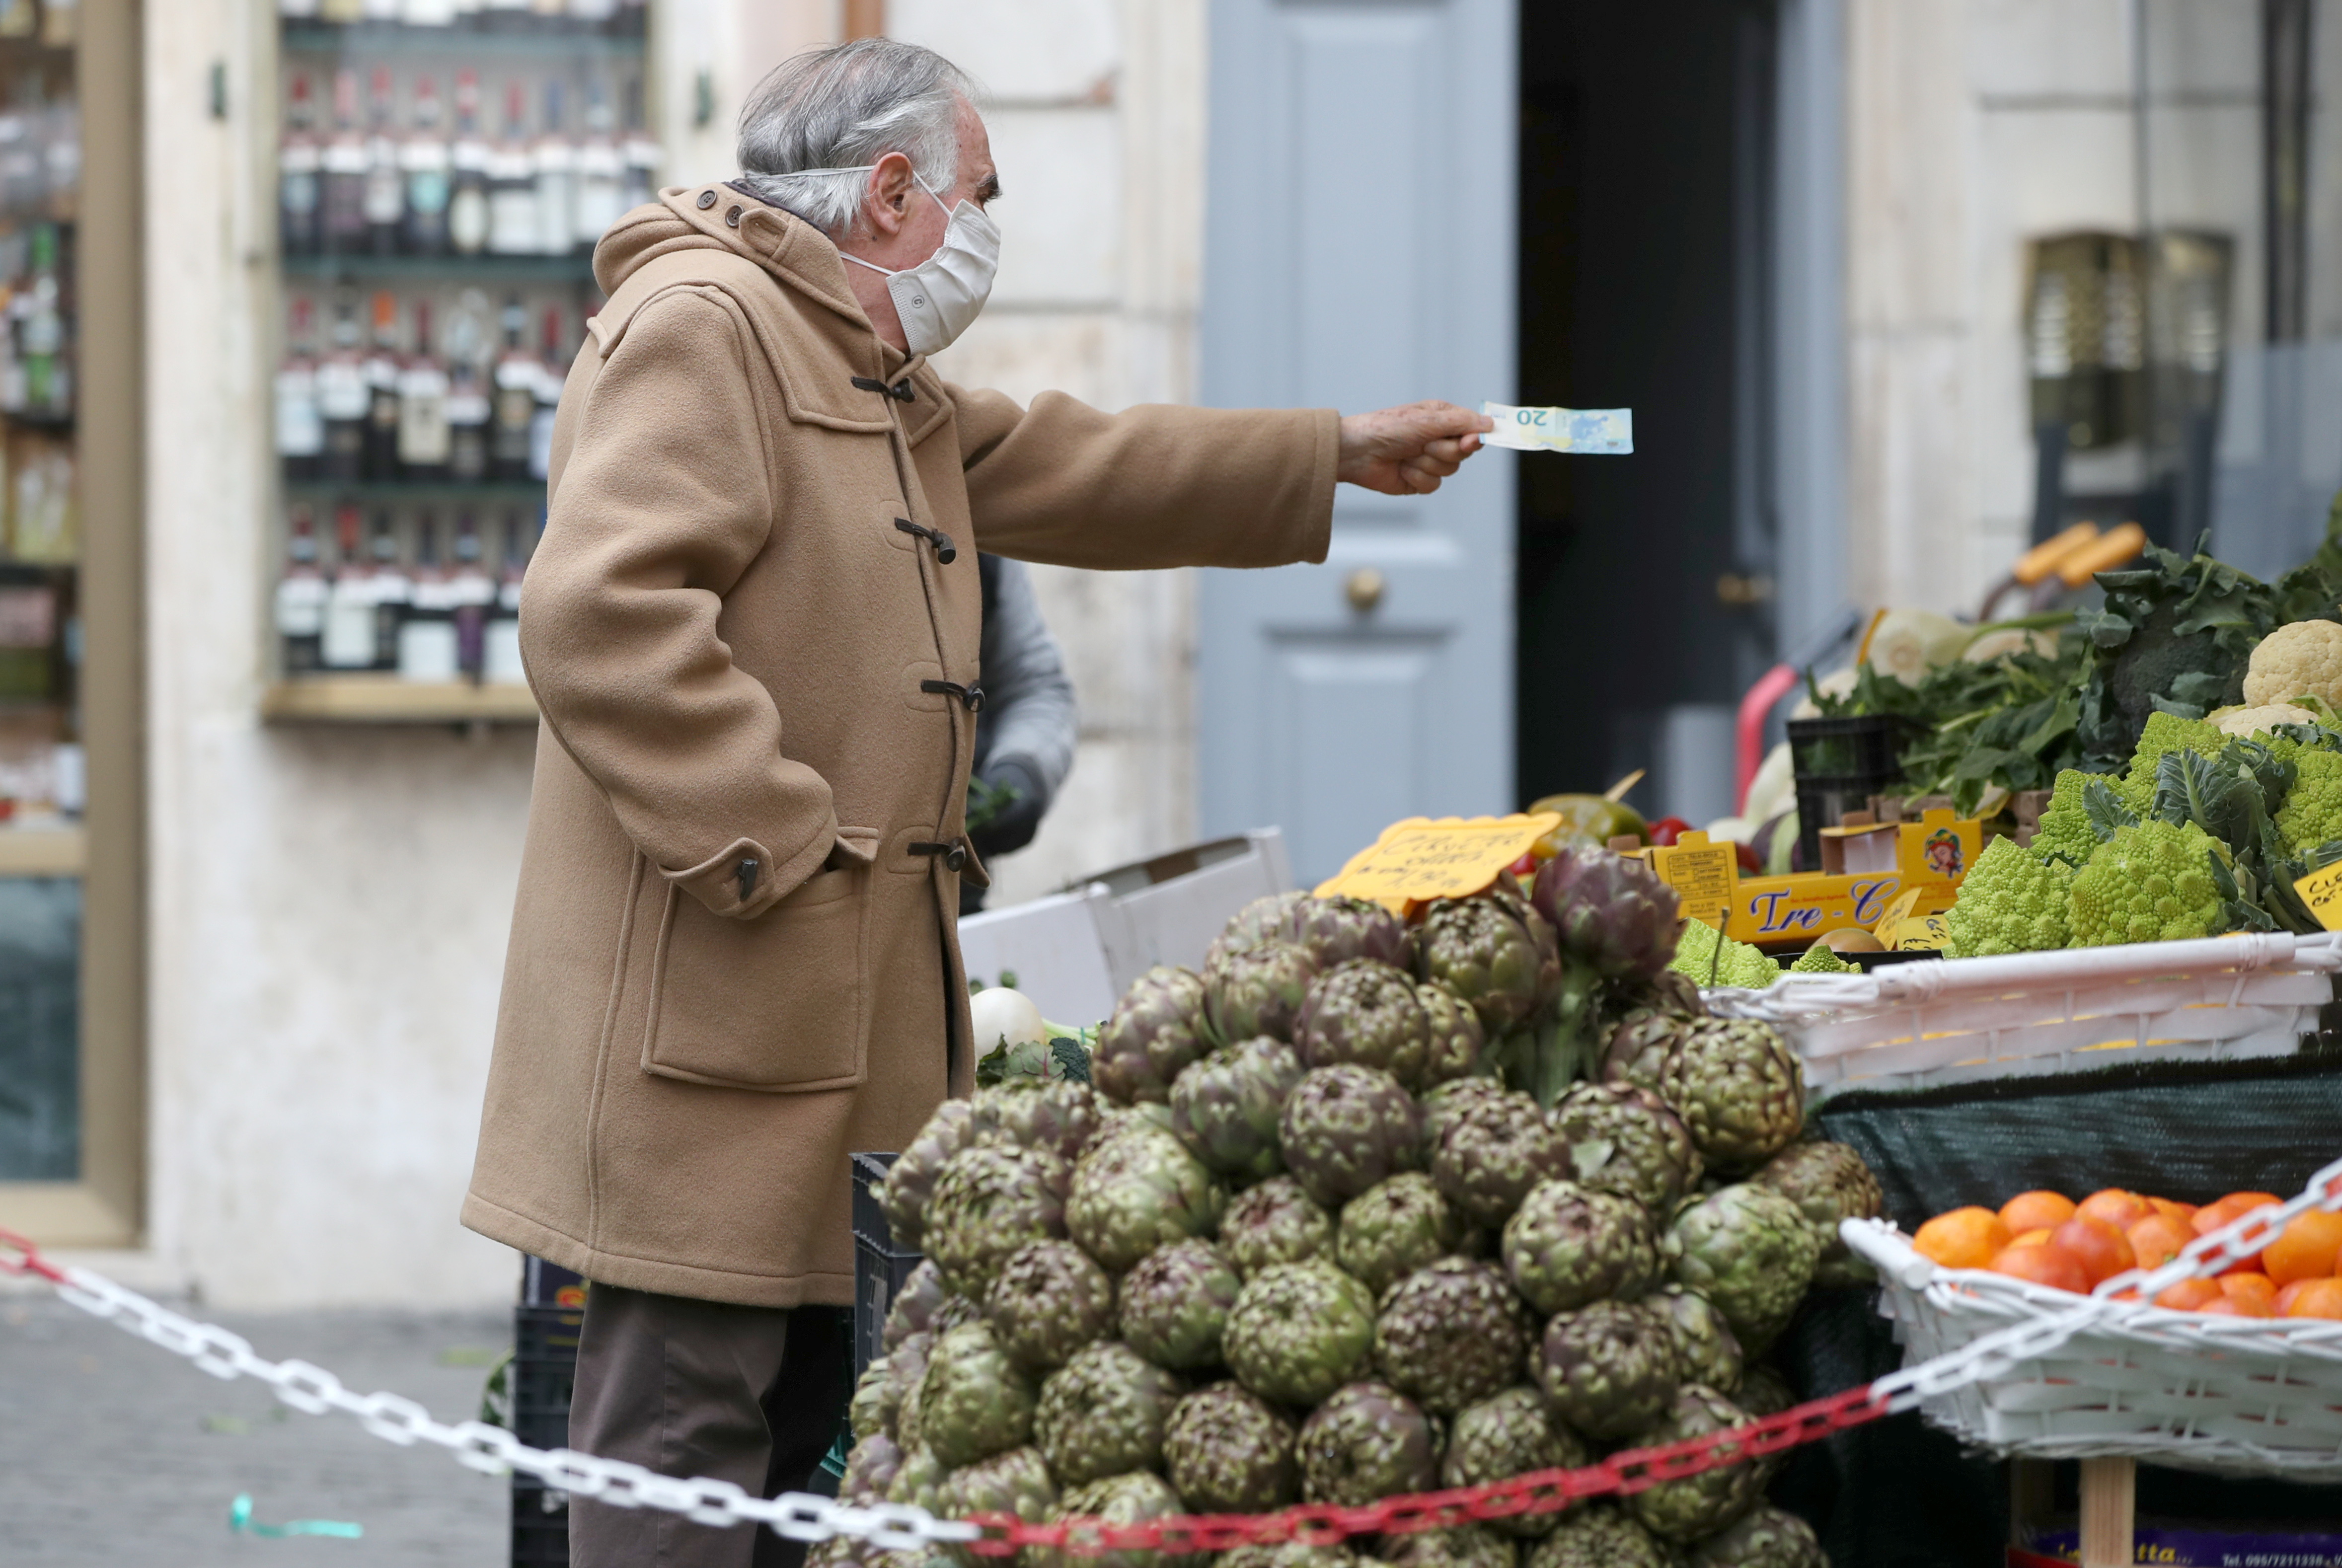 A man shops groceries at an open-air market as the government is due to announce stricter coronavirus disease (COVID-19) restrictions, in Rome, Italy, March 12, 2021. REUTERS/Yara Nardi